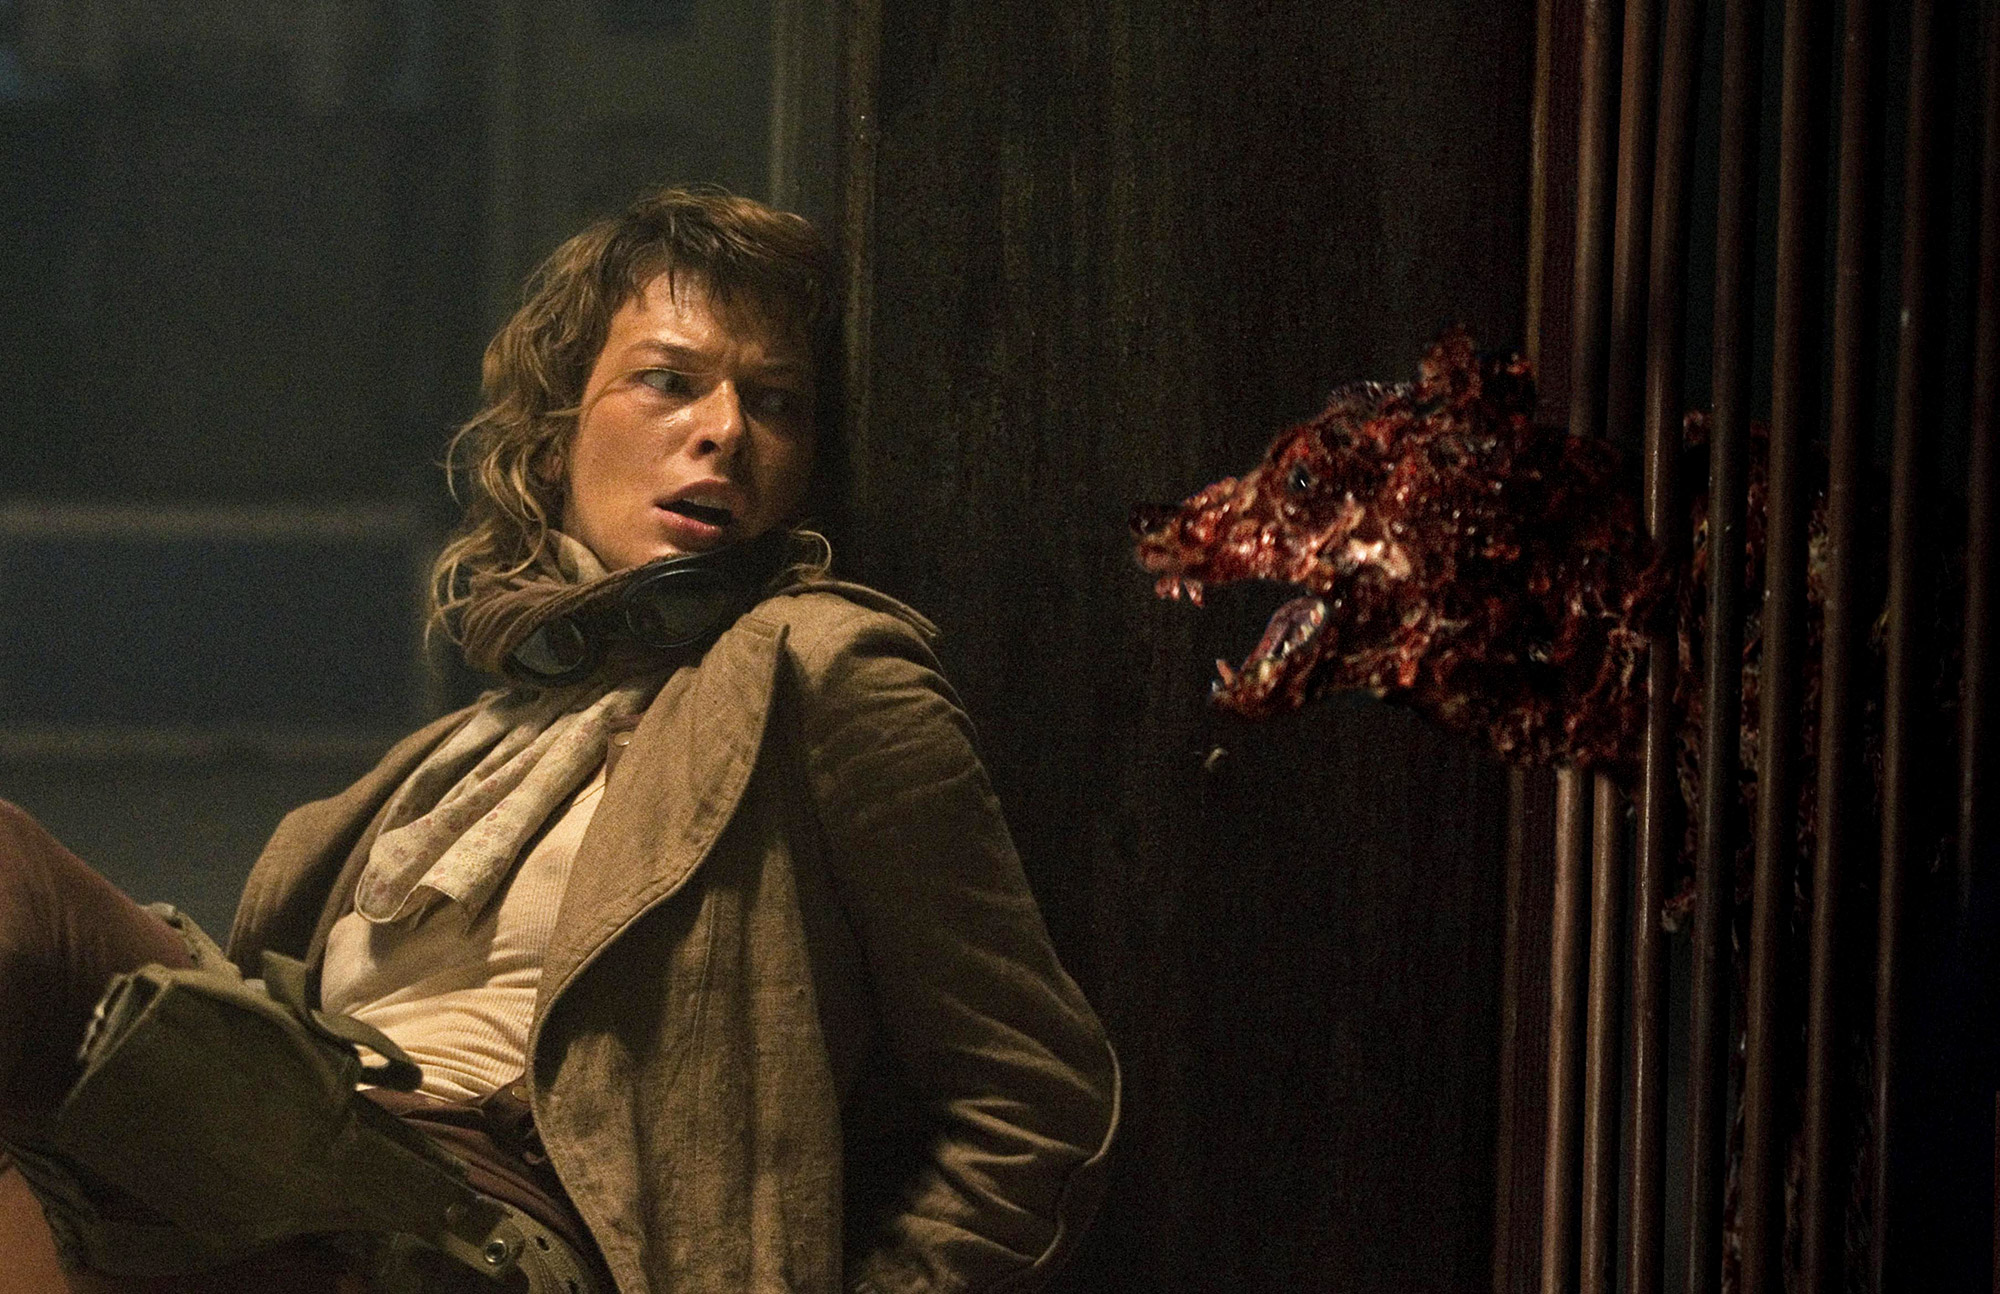 How To Watch All 'Resident Evil' Movies in Order